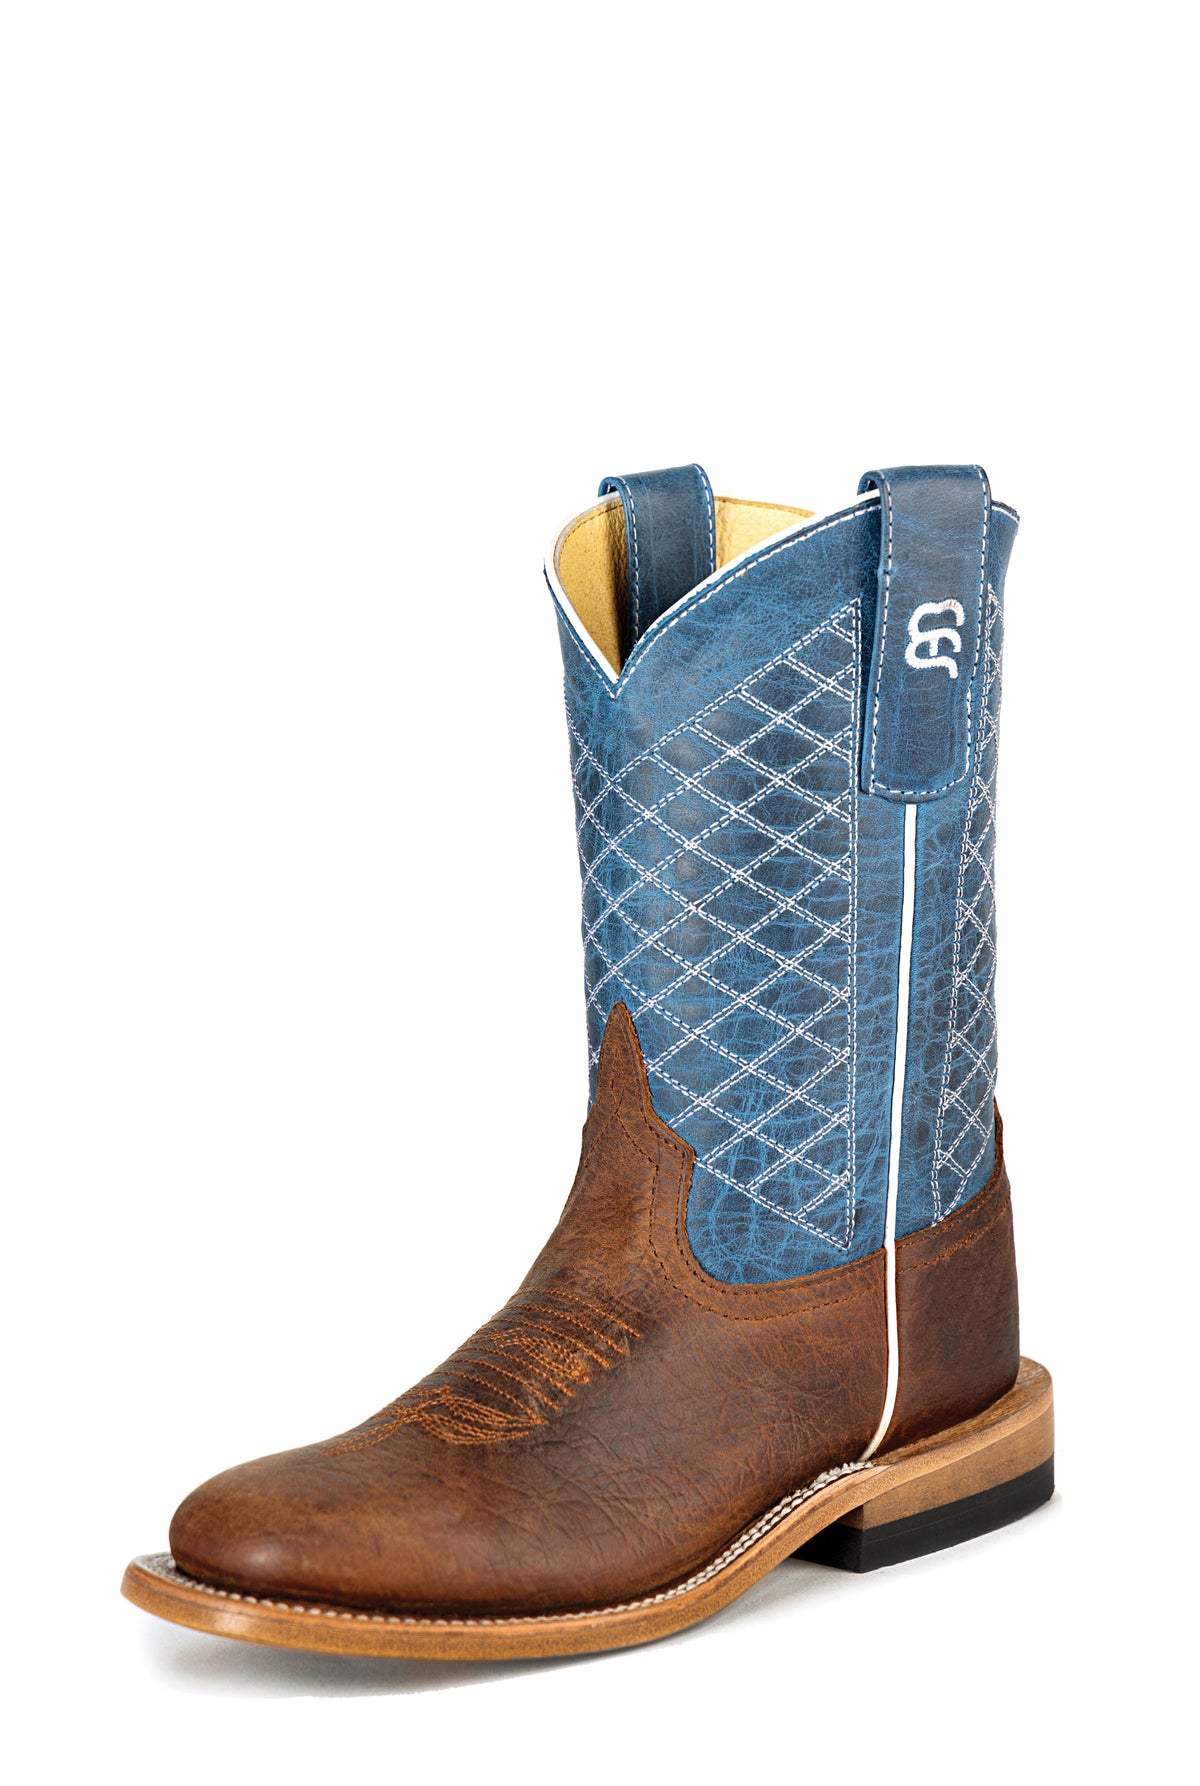 Kid's Anderson Bean Toast Bison Square Toe Boot